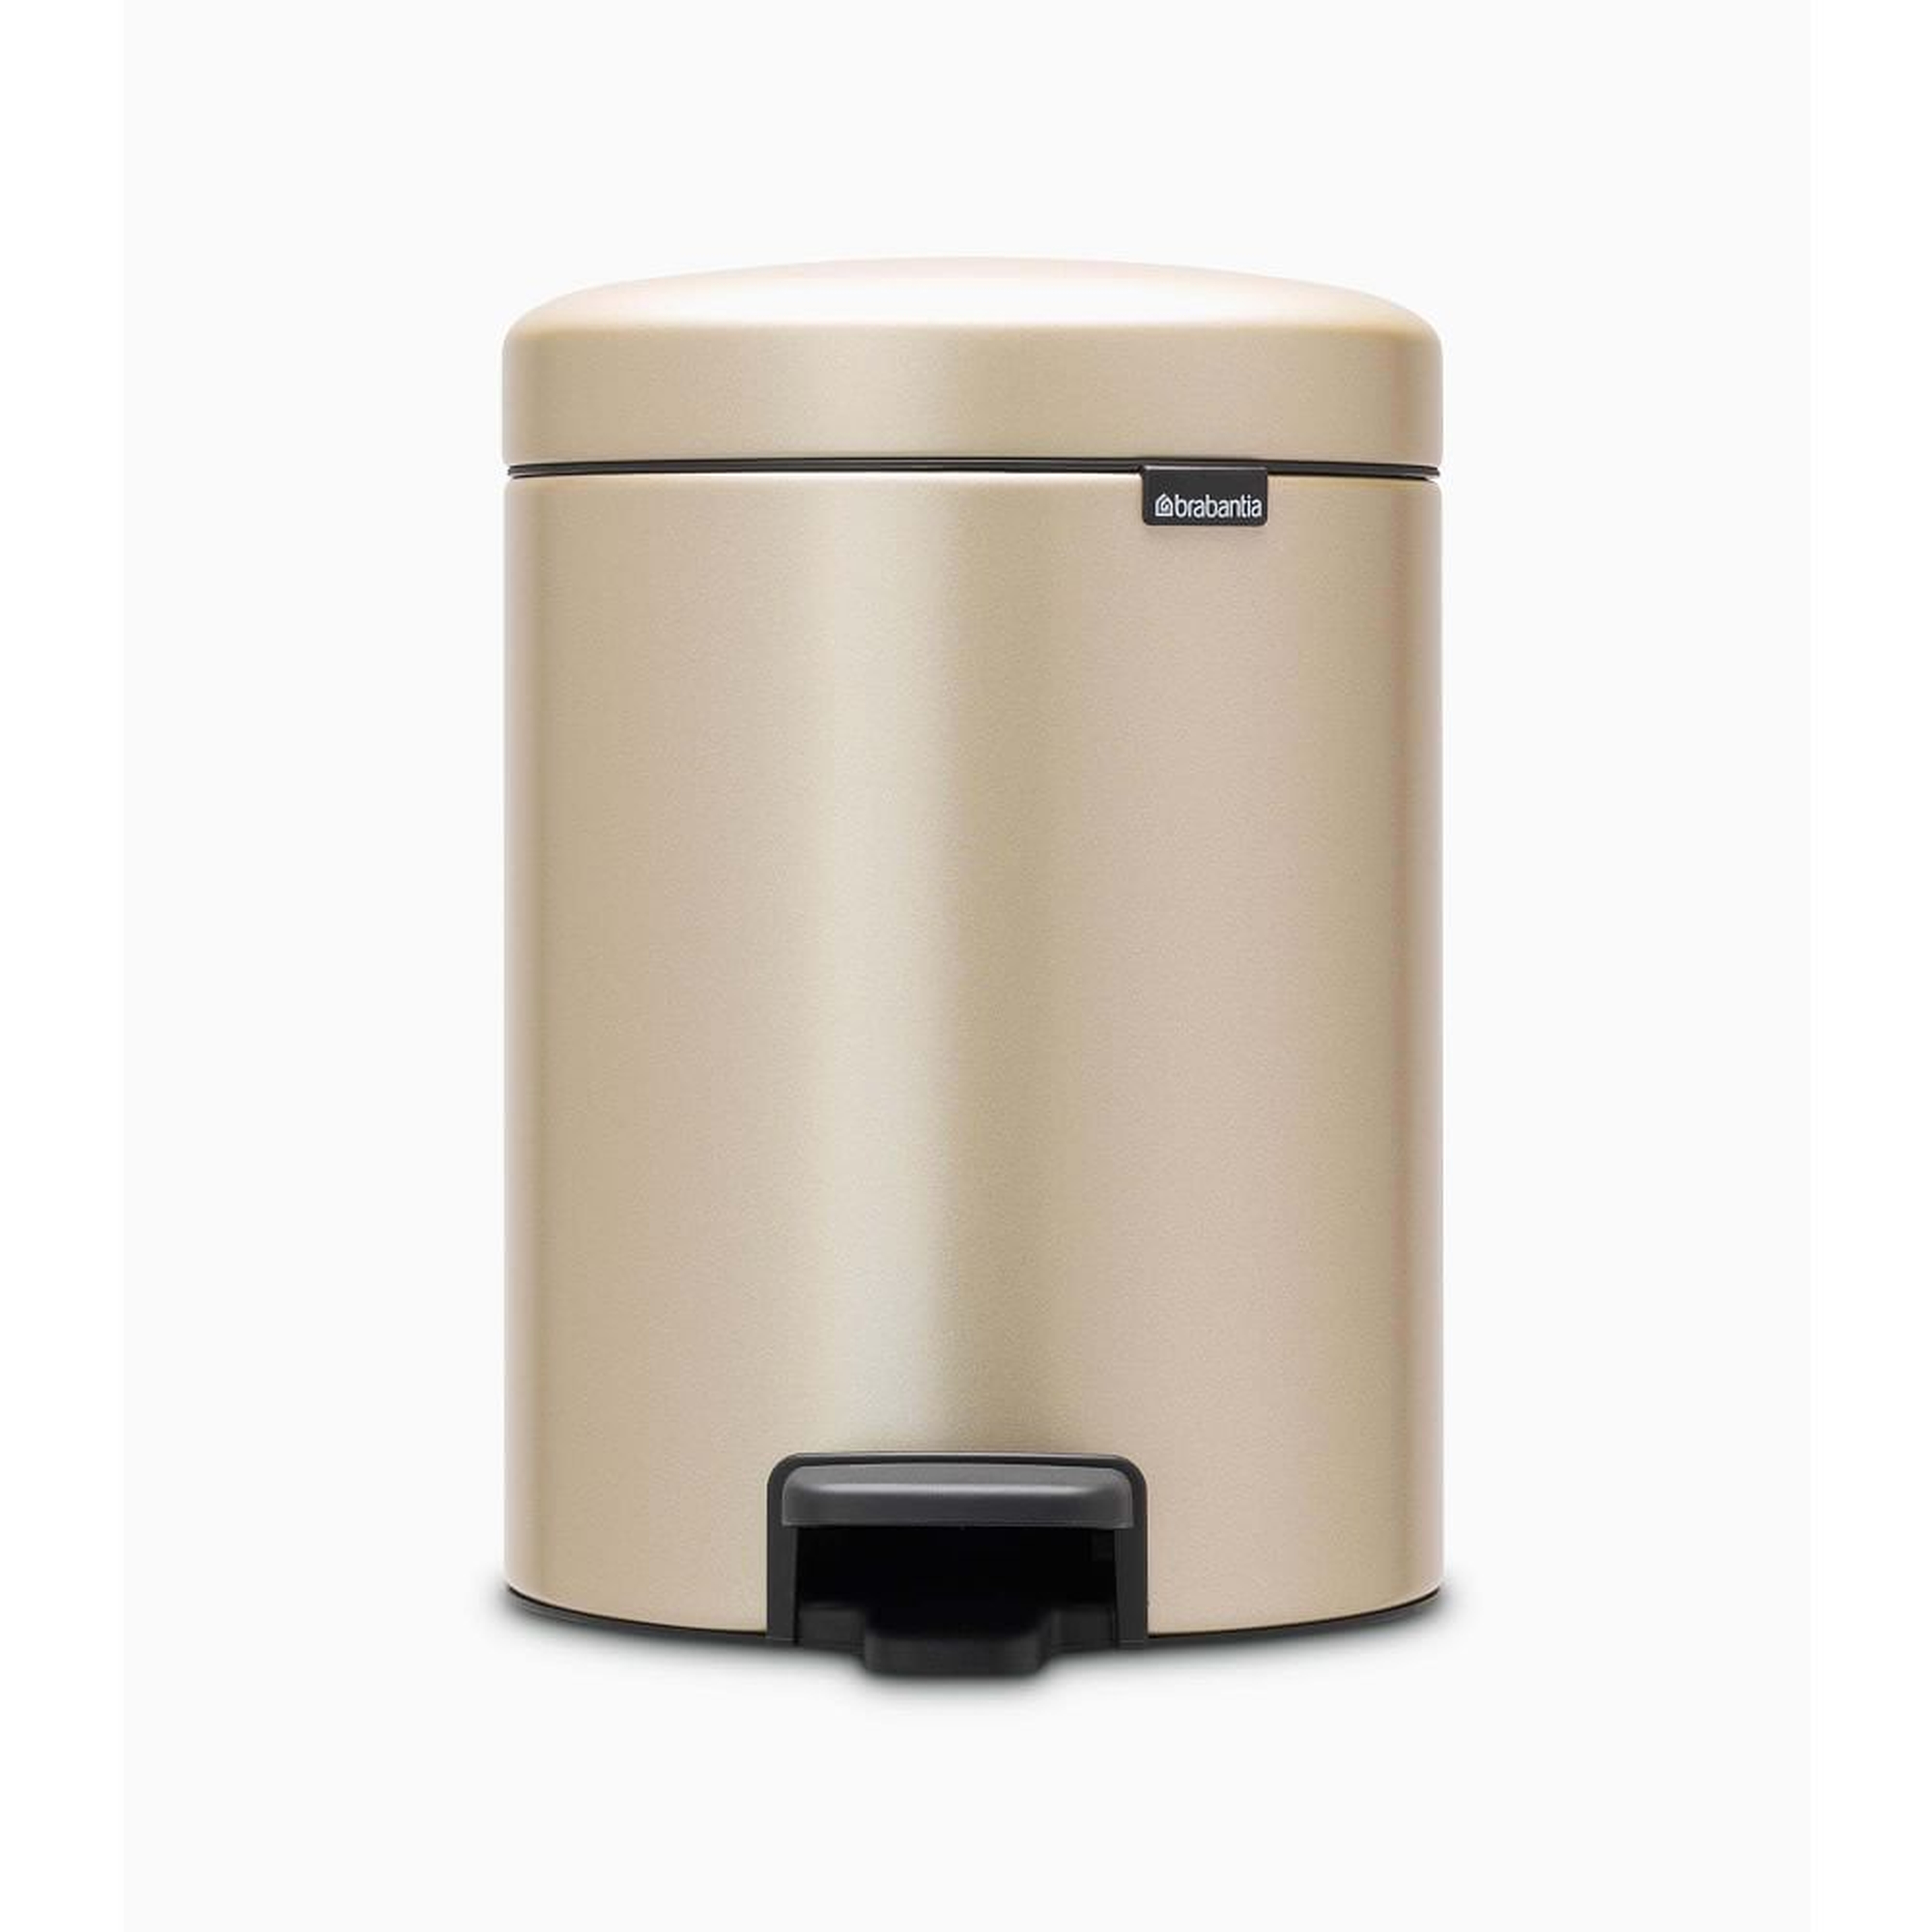 Brabantia New Icon Step Trash Can, 1.3 Gallon, Champagne - West Elm